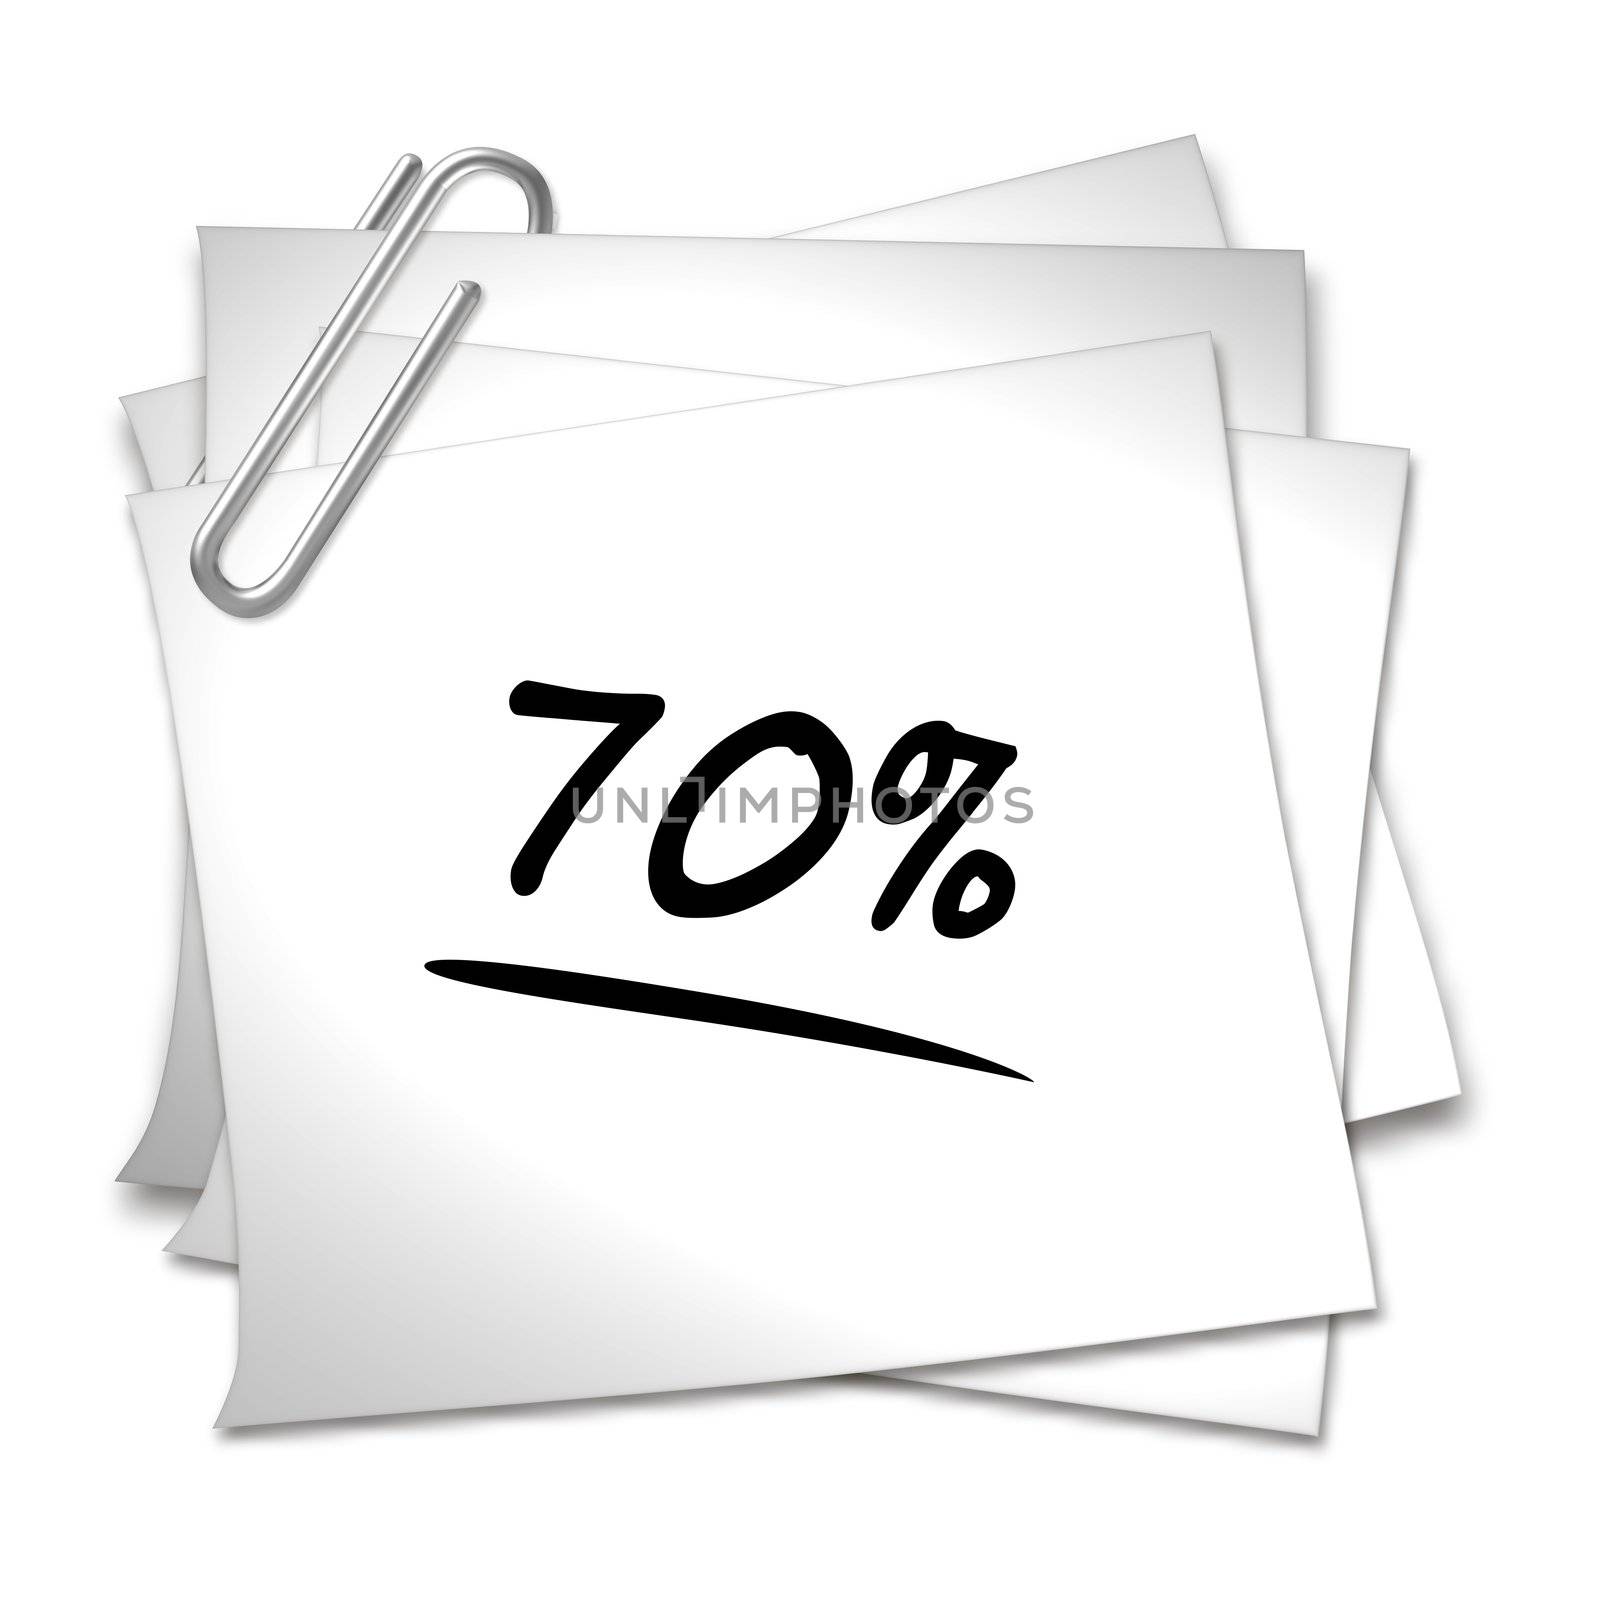 Memo with Paper Clip - 70 % by peromarketing